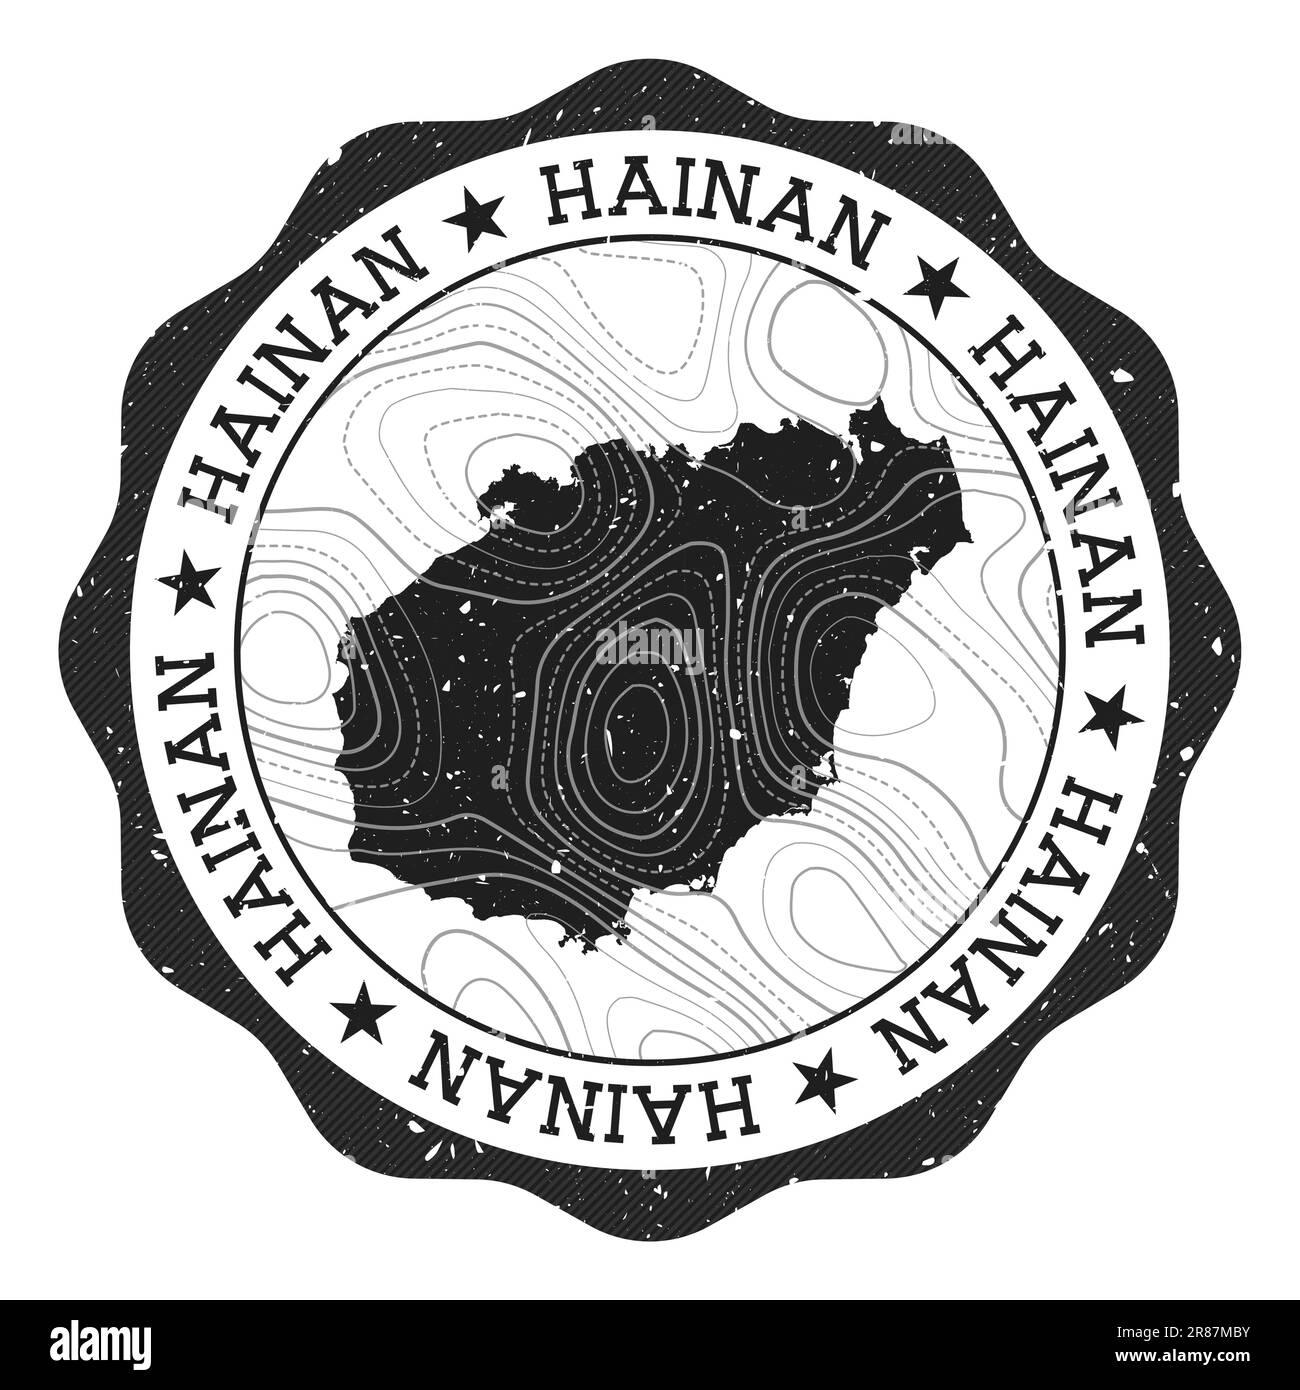 Hainan outdoor stamp. Round sticker with map of island with topographic isolines. Vector illustration. Can be used as insignia, logotype, label, stick Stock Vector